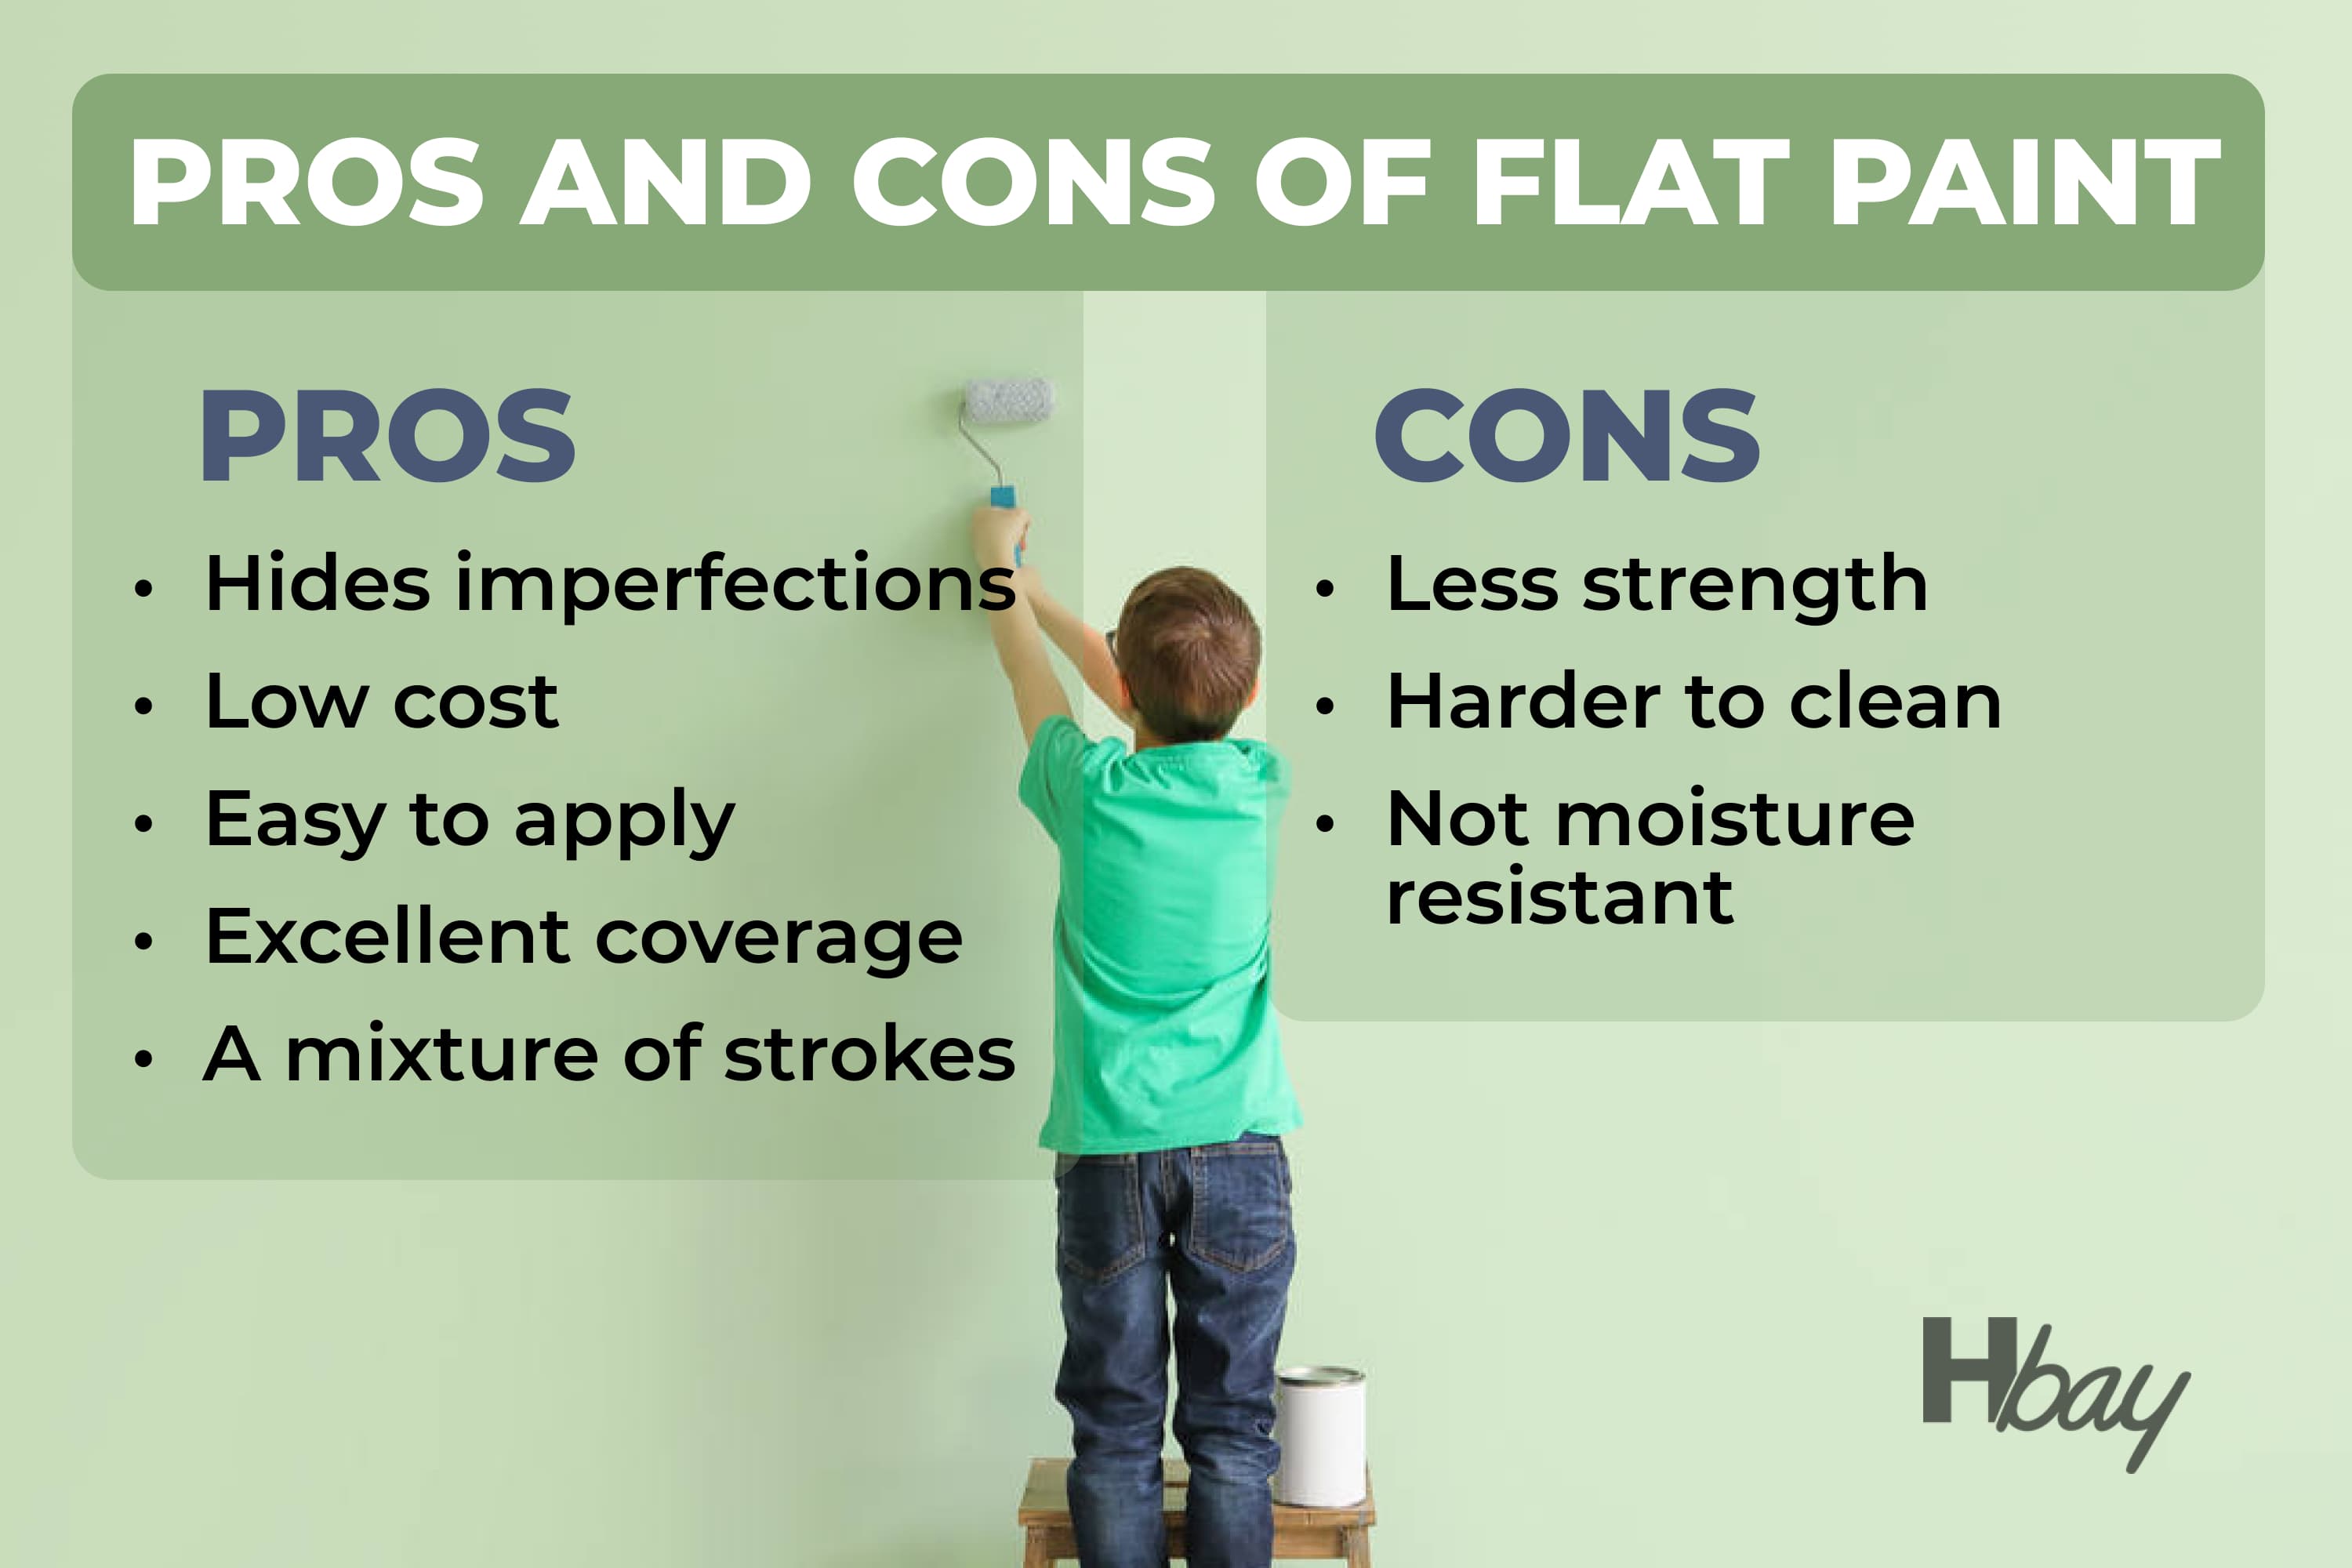 Pros and cons of flat paint